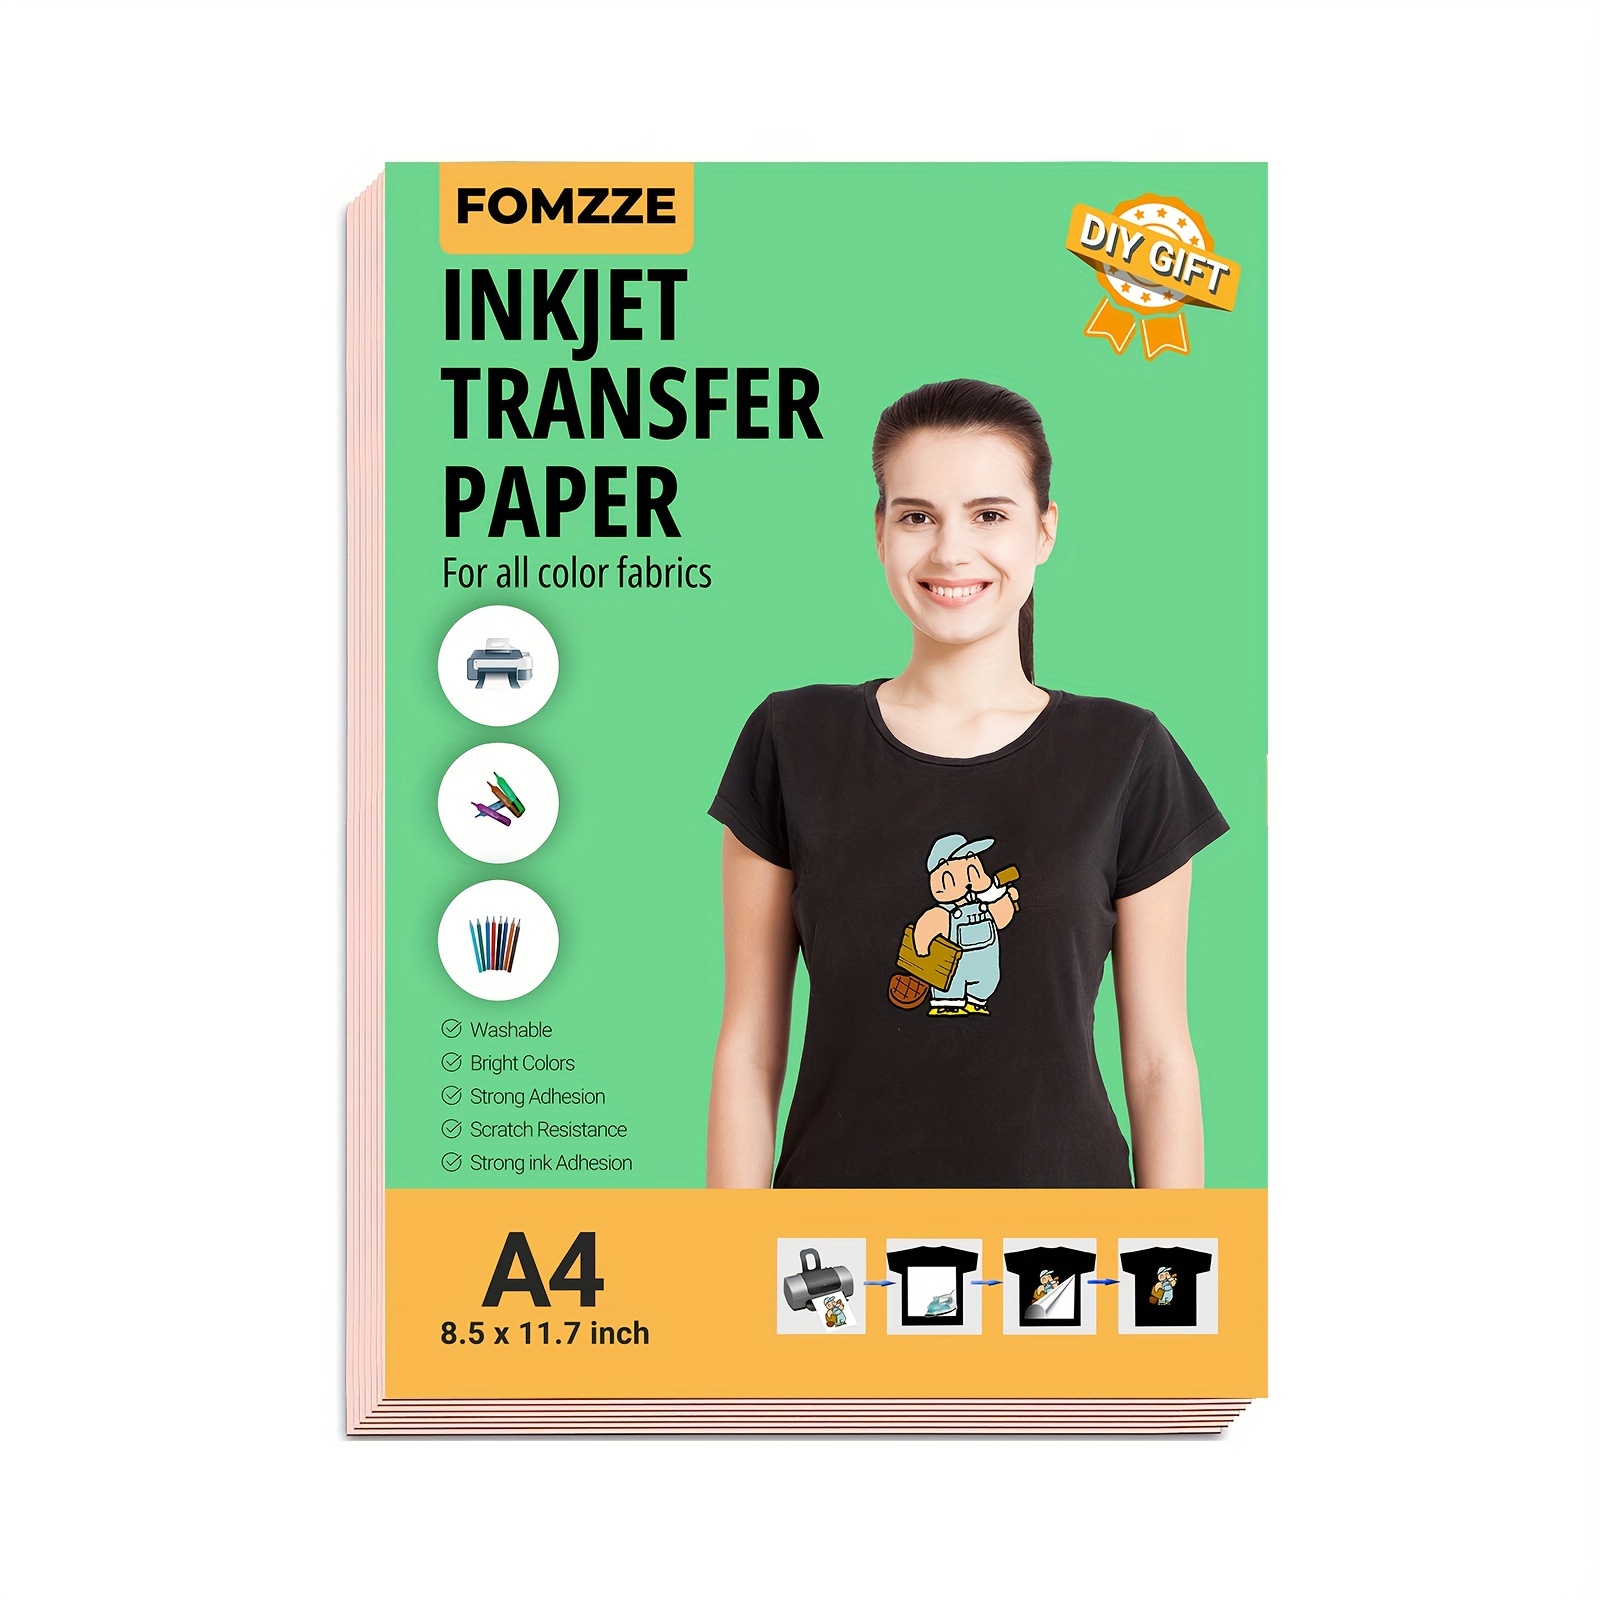 A4 Heat Transfer Paper for Dark Colors 8.5x11 (10 sheets)